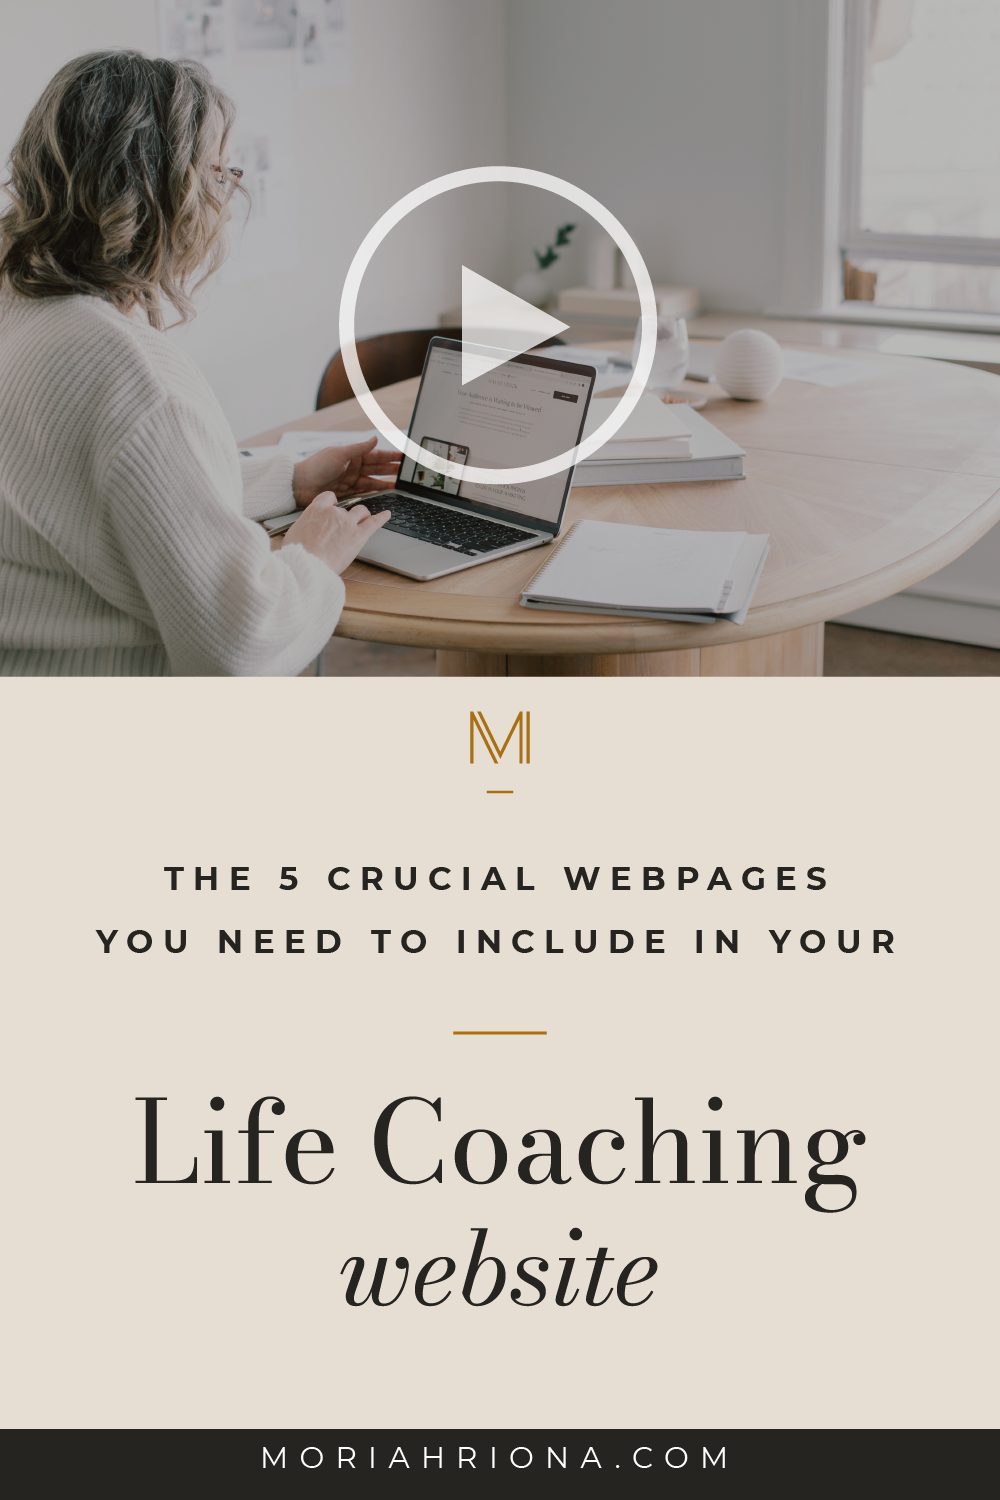 Want to know the 5 most crucial pages to include in your coaching website design? This blog post is for you! I’m sharing what goes into a spectacular life coach website—including my best tips for attracting more dream clients for your coaching business. #webdesign #luxurybranding #lifecoach #consulting